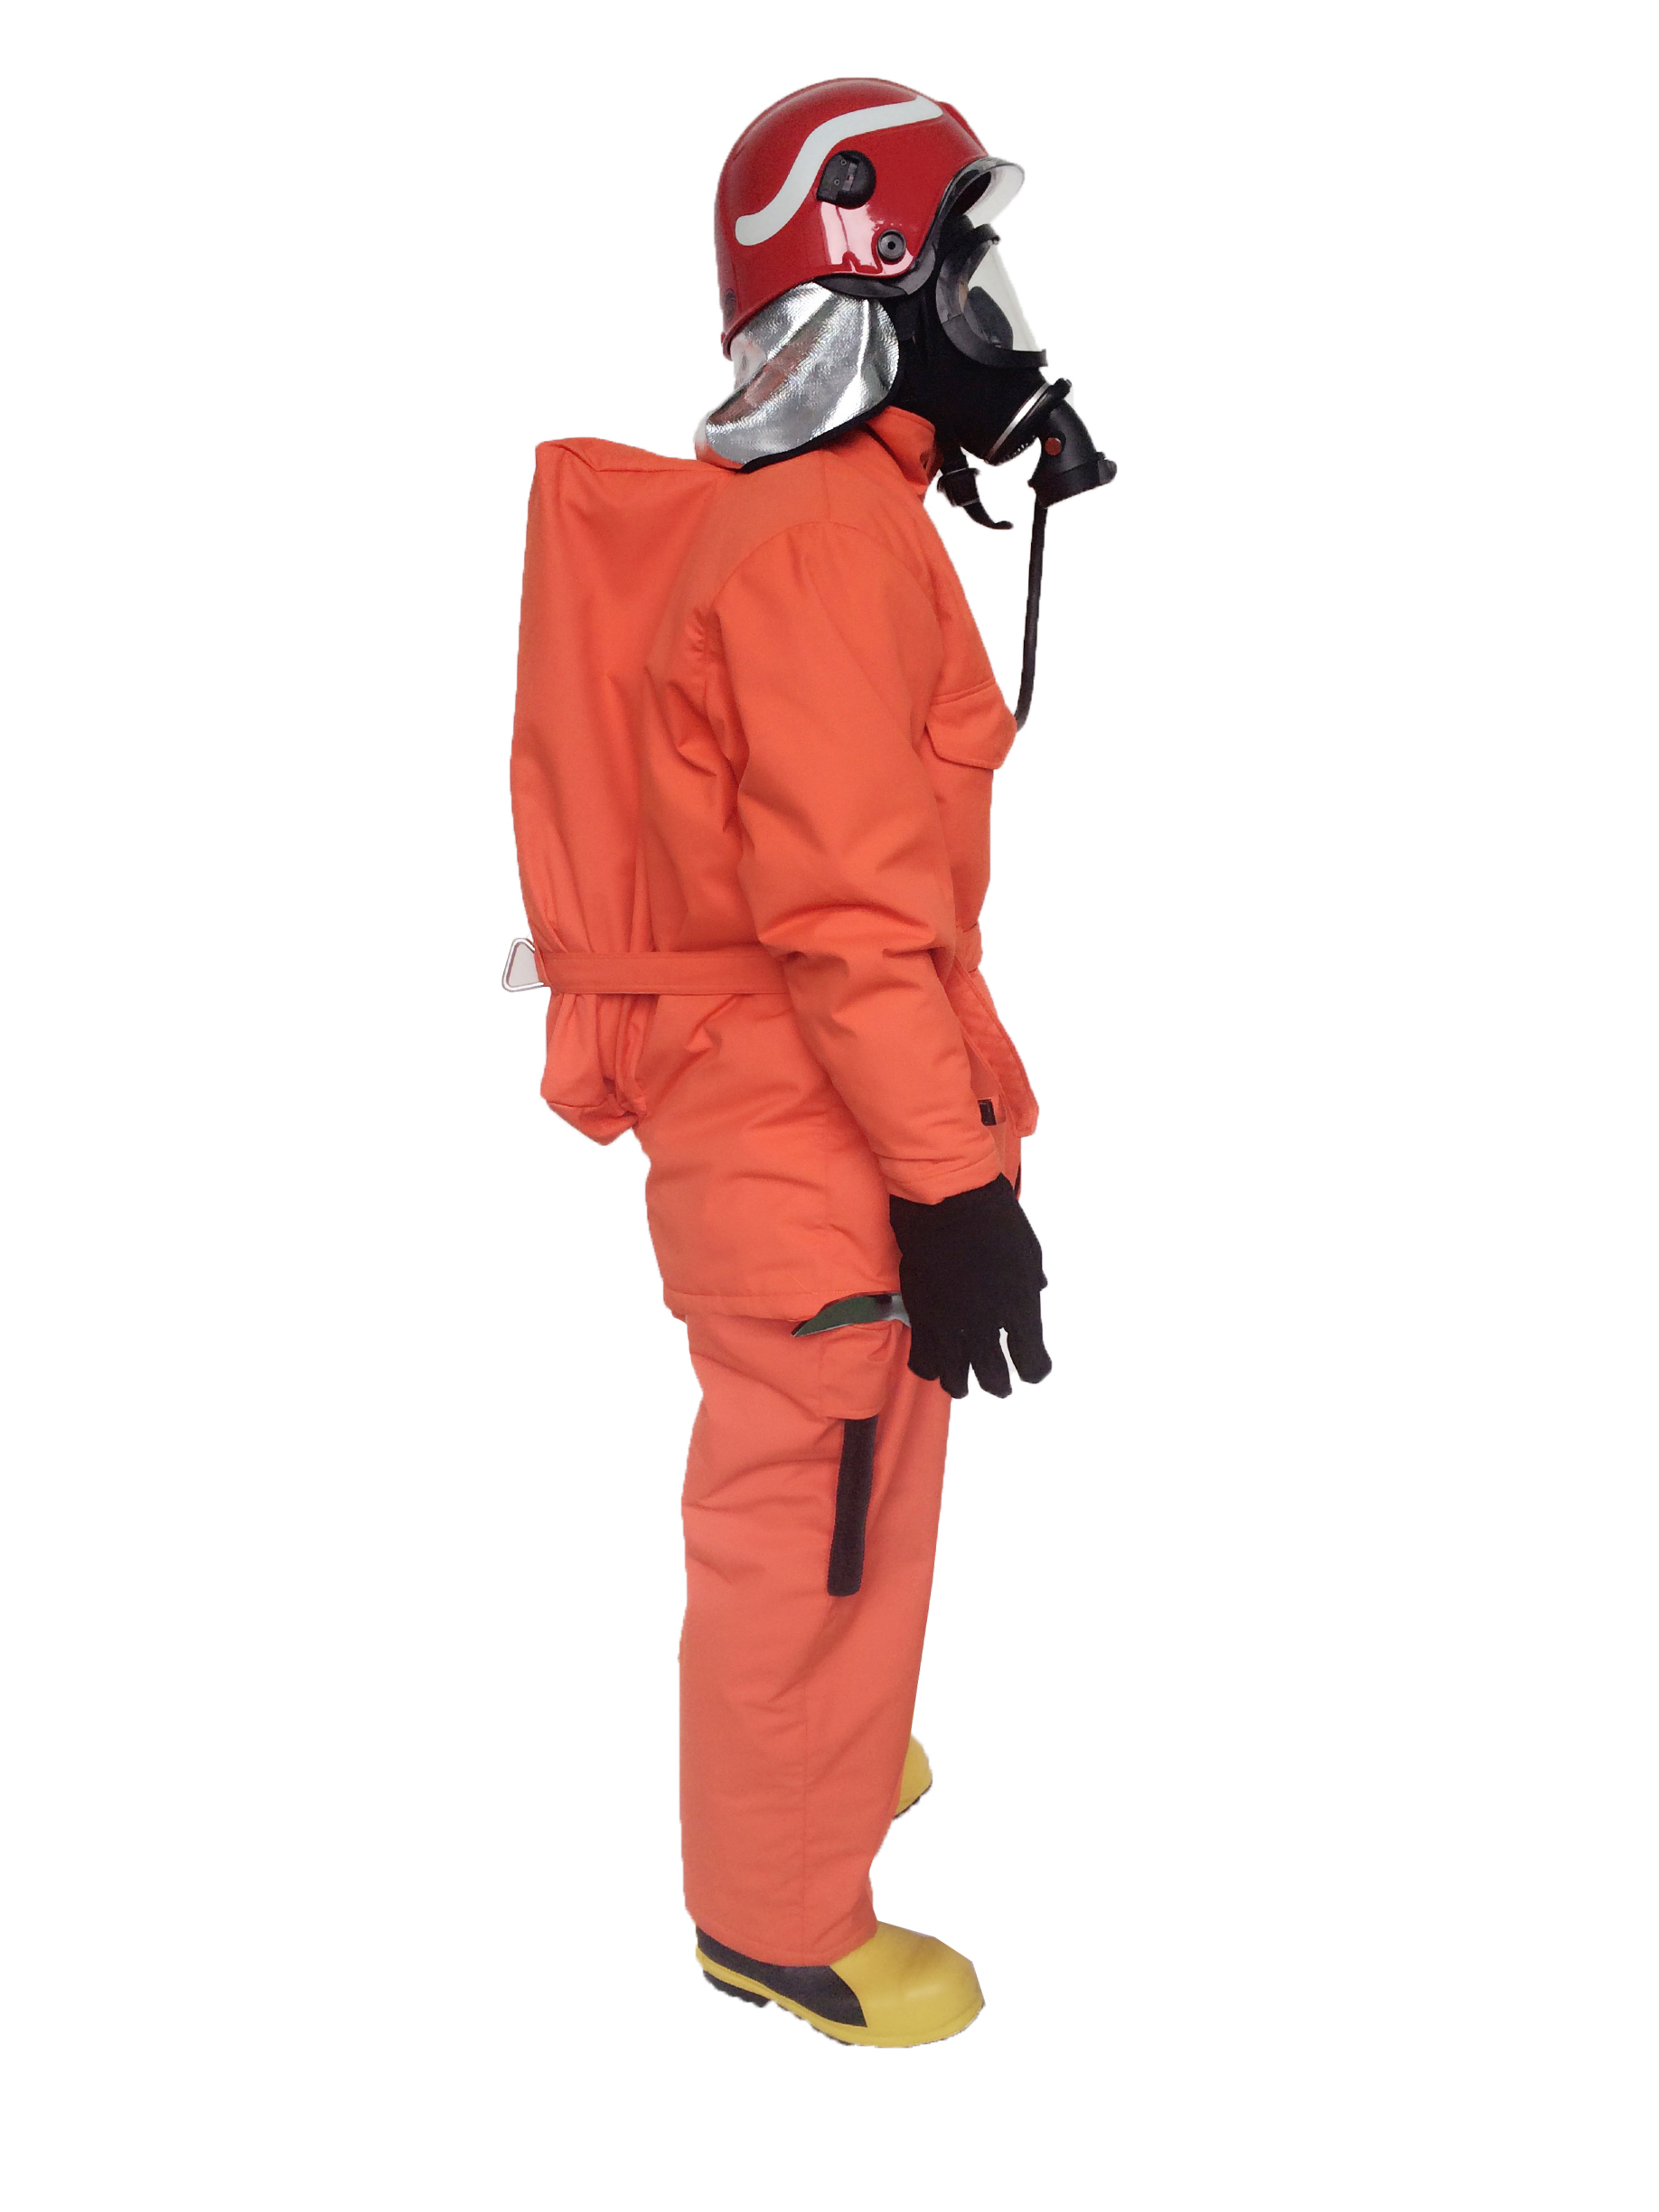 FIRE FIGHTER'S PROTECTIVE SUIT 